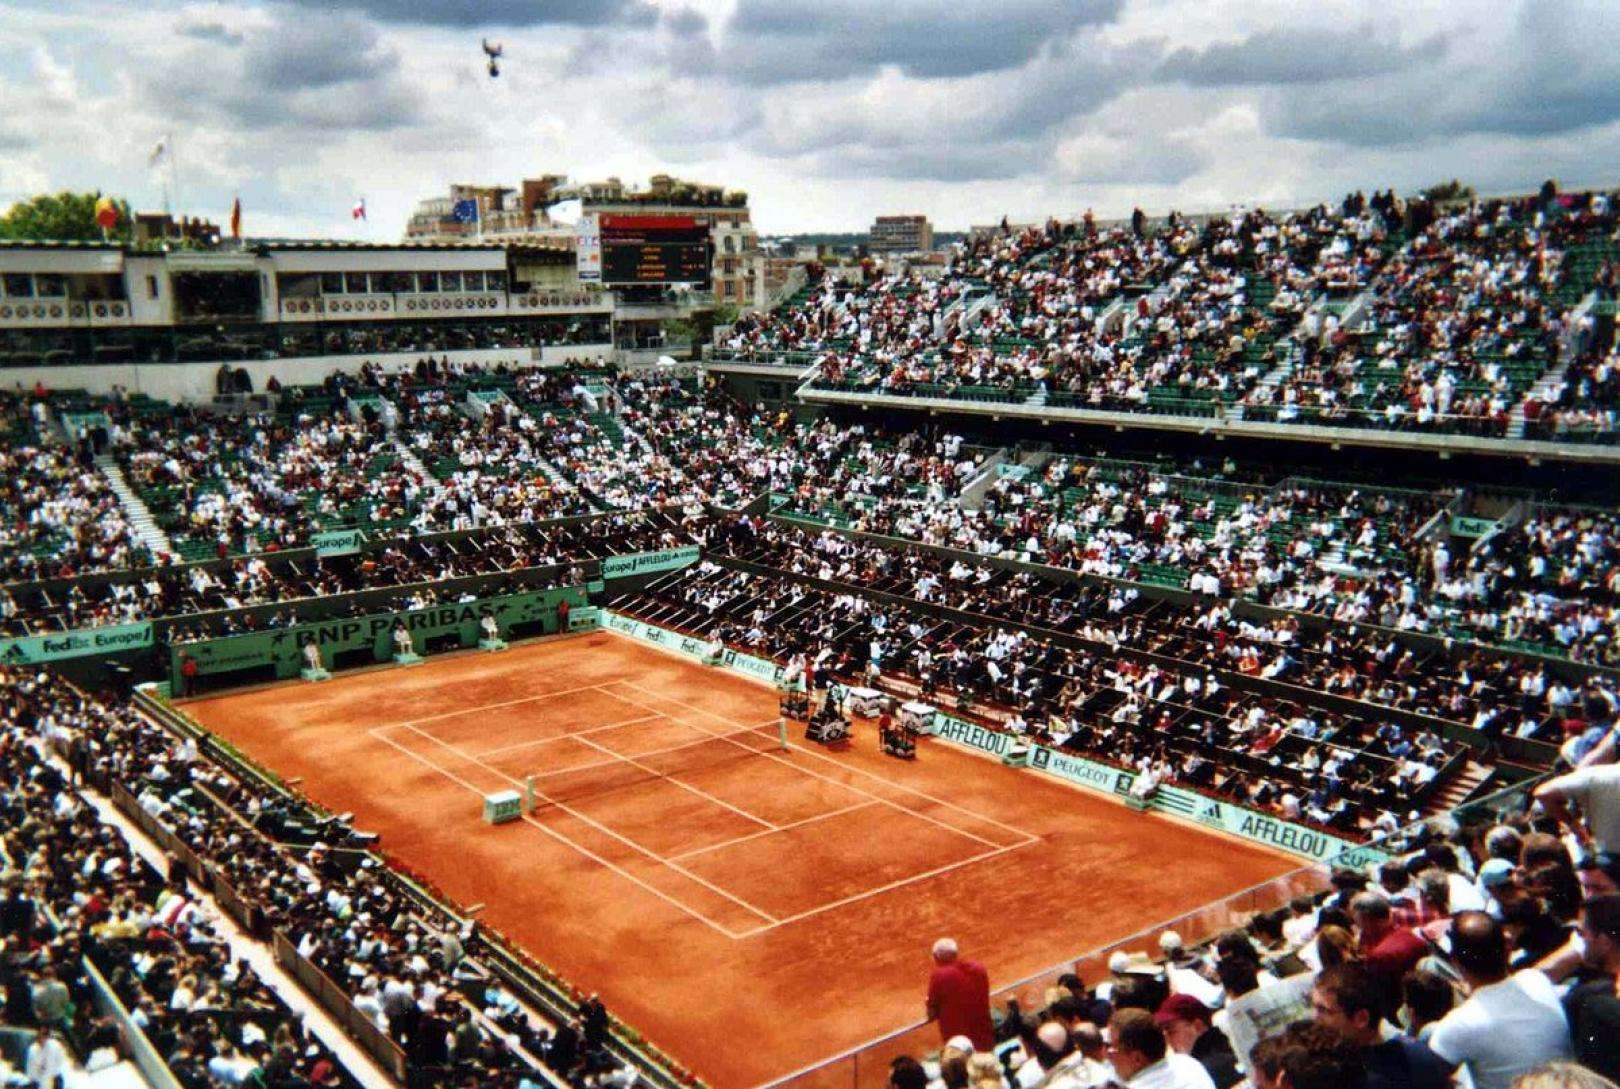 The French Open; a much-anticipated event